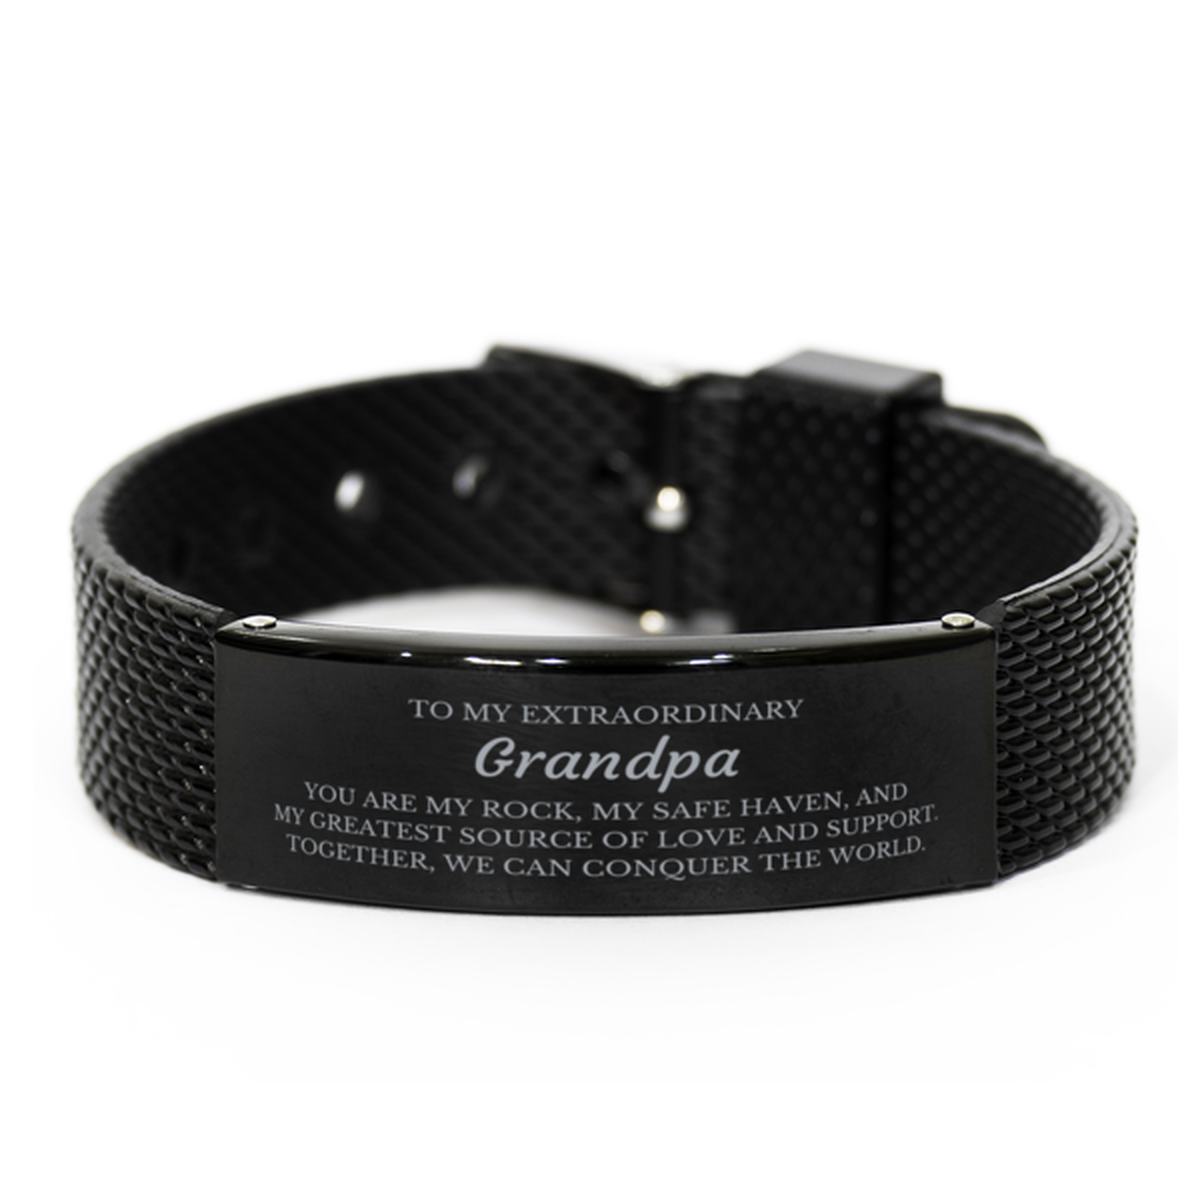 To My Extraordinary Grandpa Gifts, Together, we can conquer the world, Birthday Black Shark Mesh Bracelet For Grandpa, Christmas Gifts For Grandpa